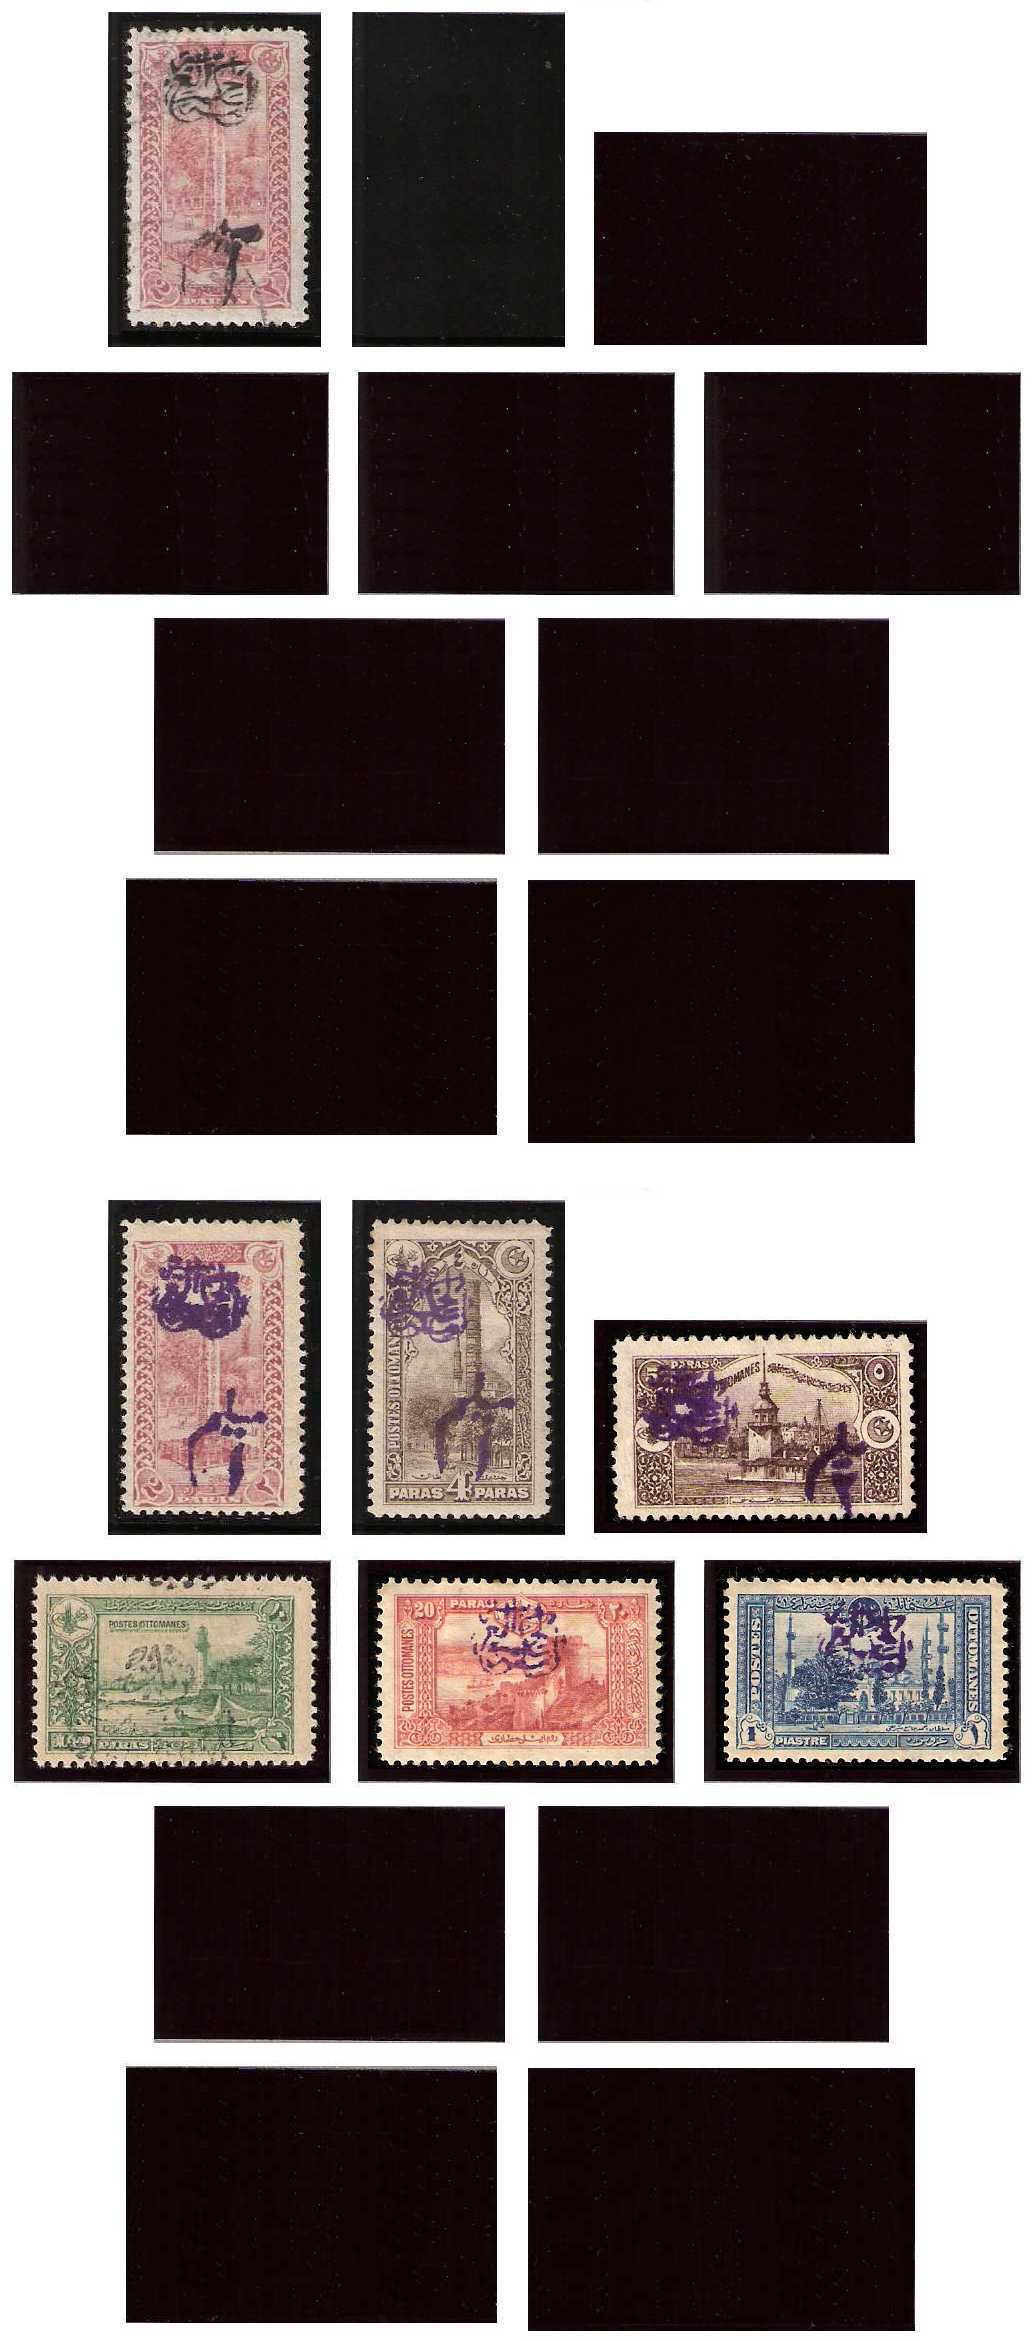 1.1920 Syria, Mi 2/11, King Feyssal, Overprinted 1914 Stamps of the Ottoman Empire